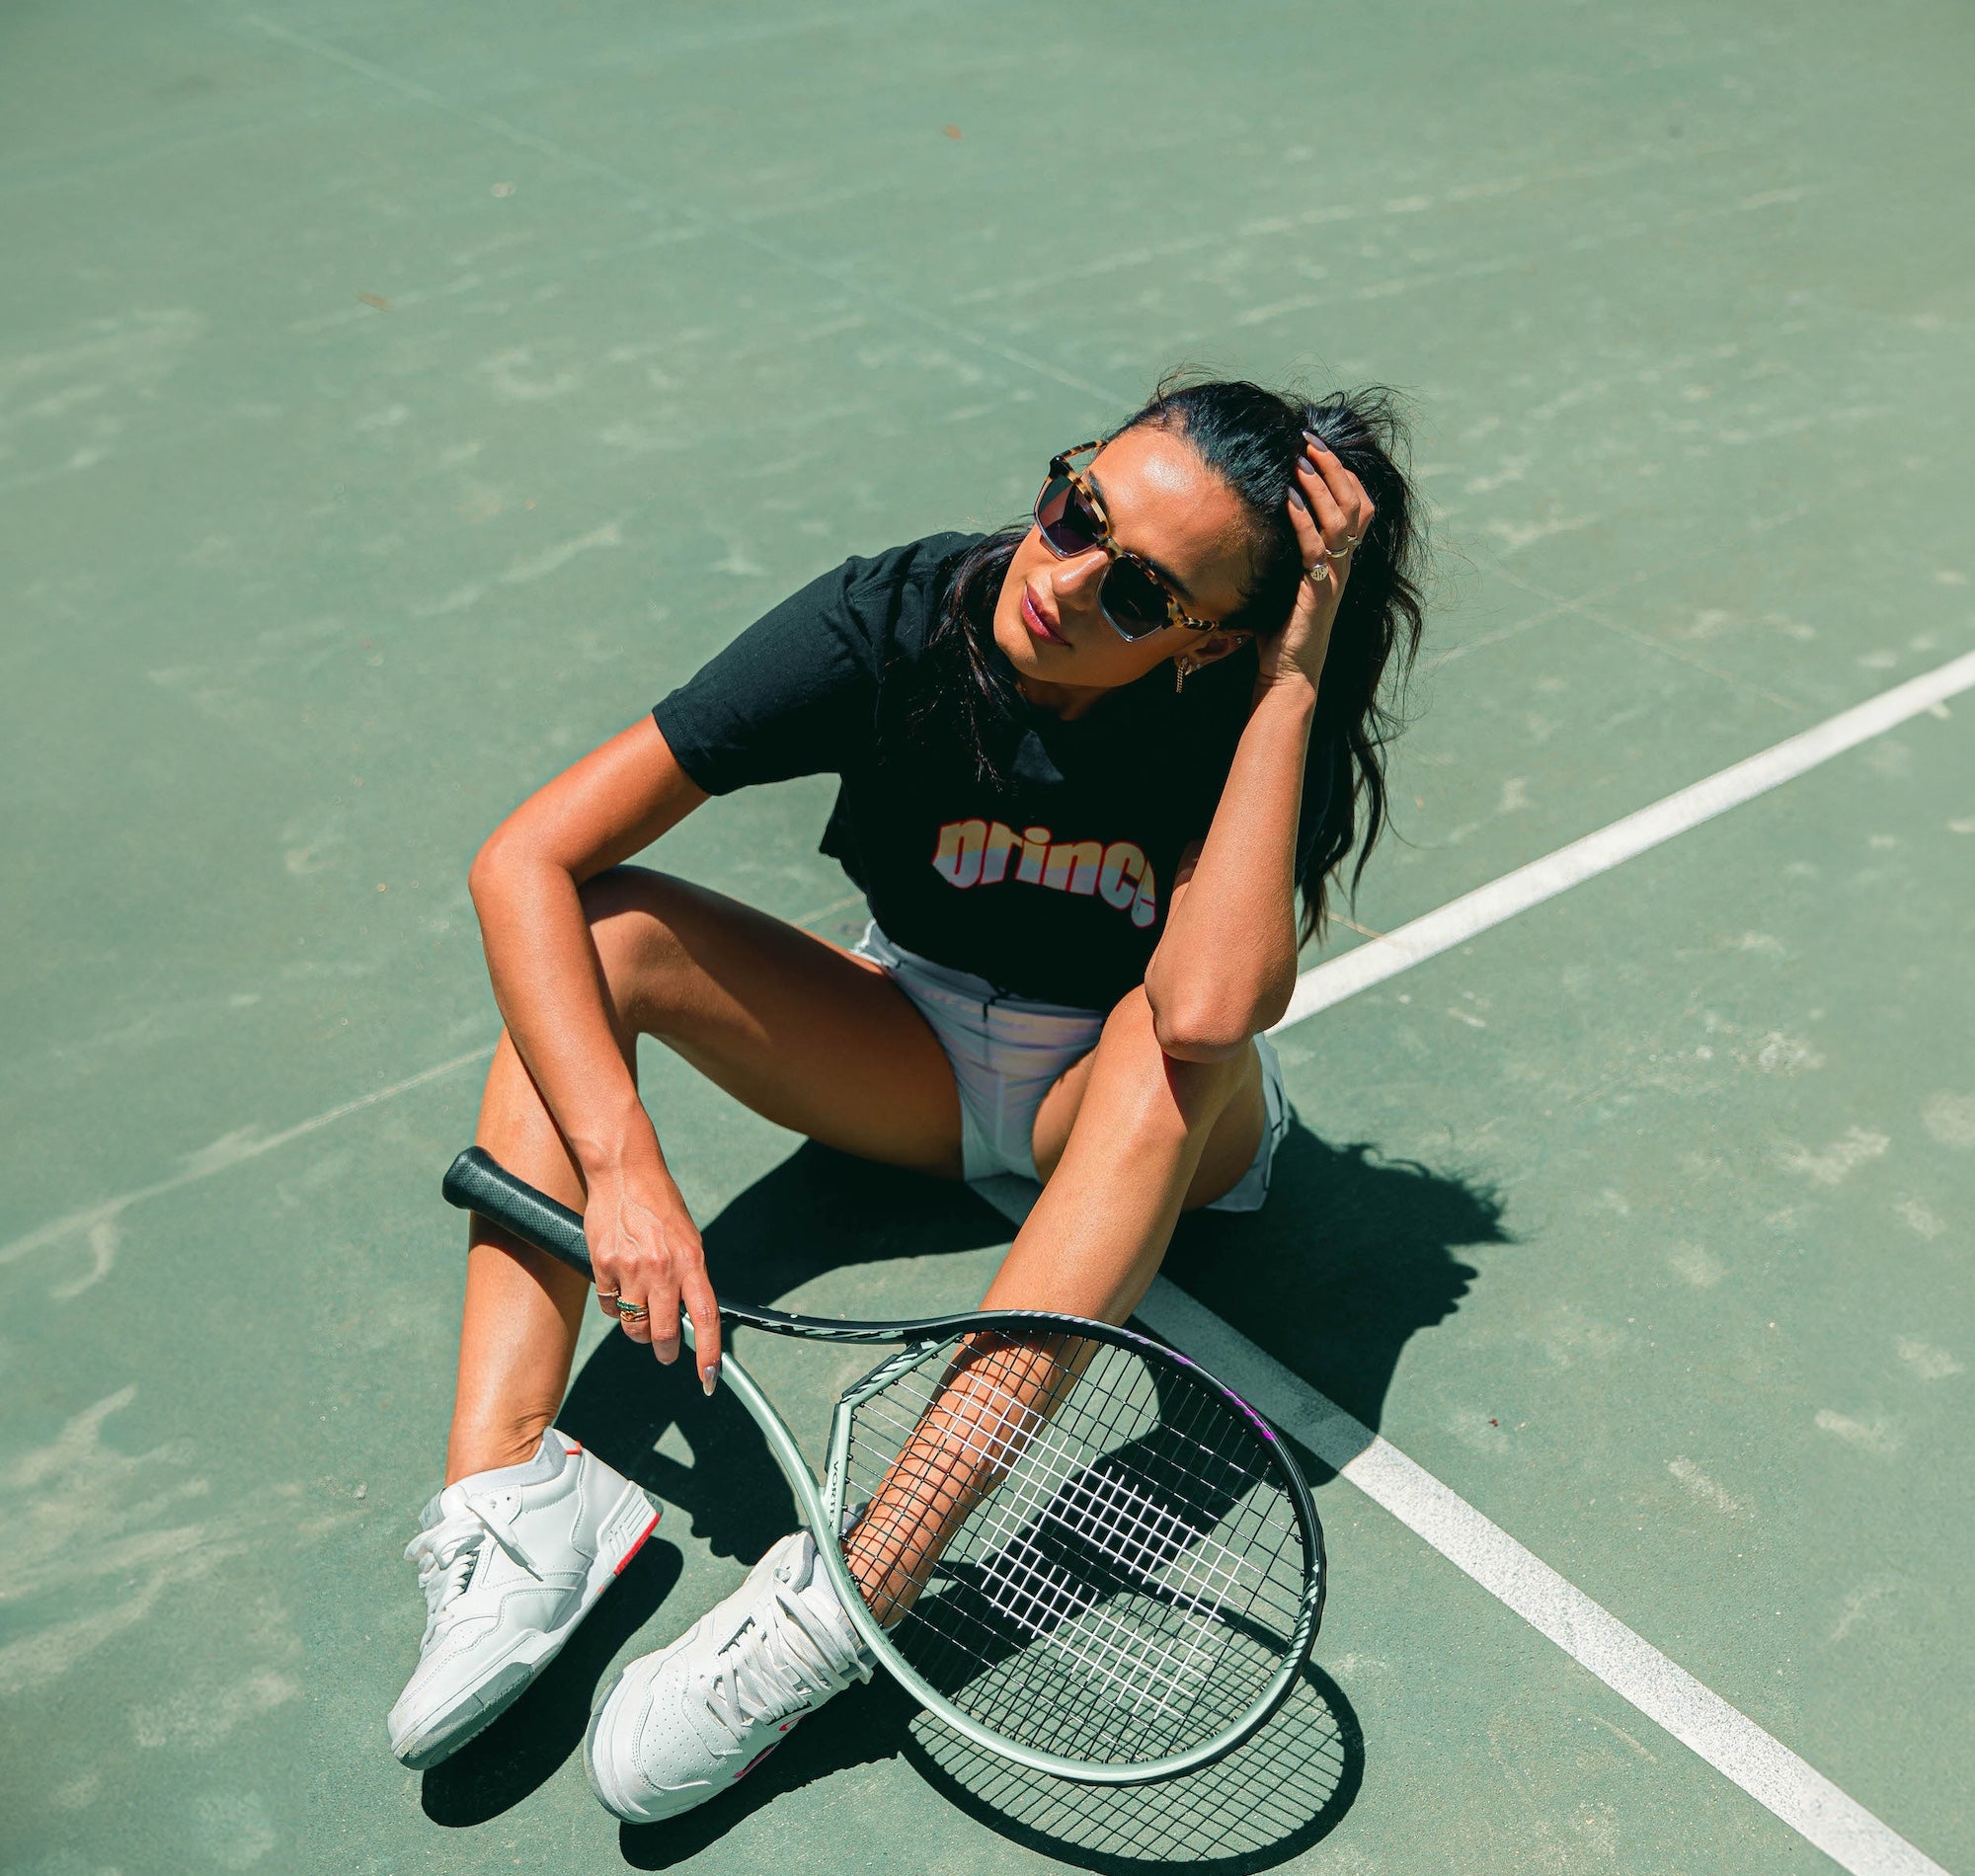 Woman at a tennis court wearing the Prince x illesteva frames